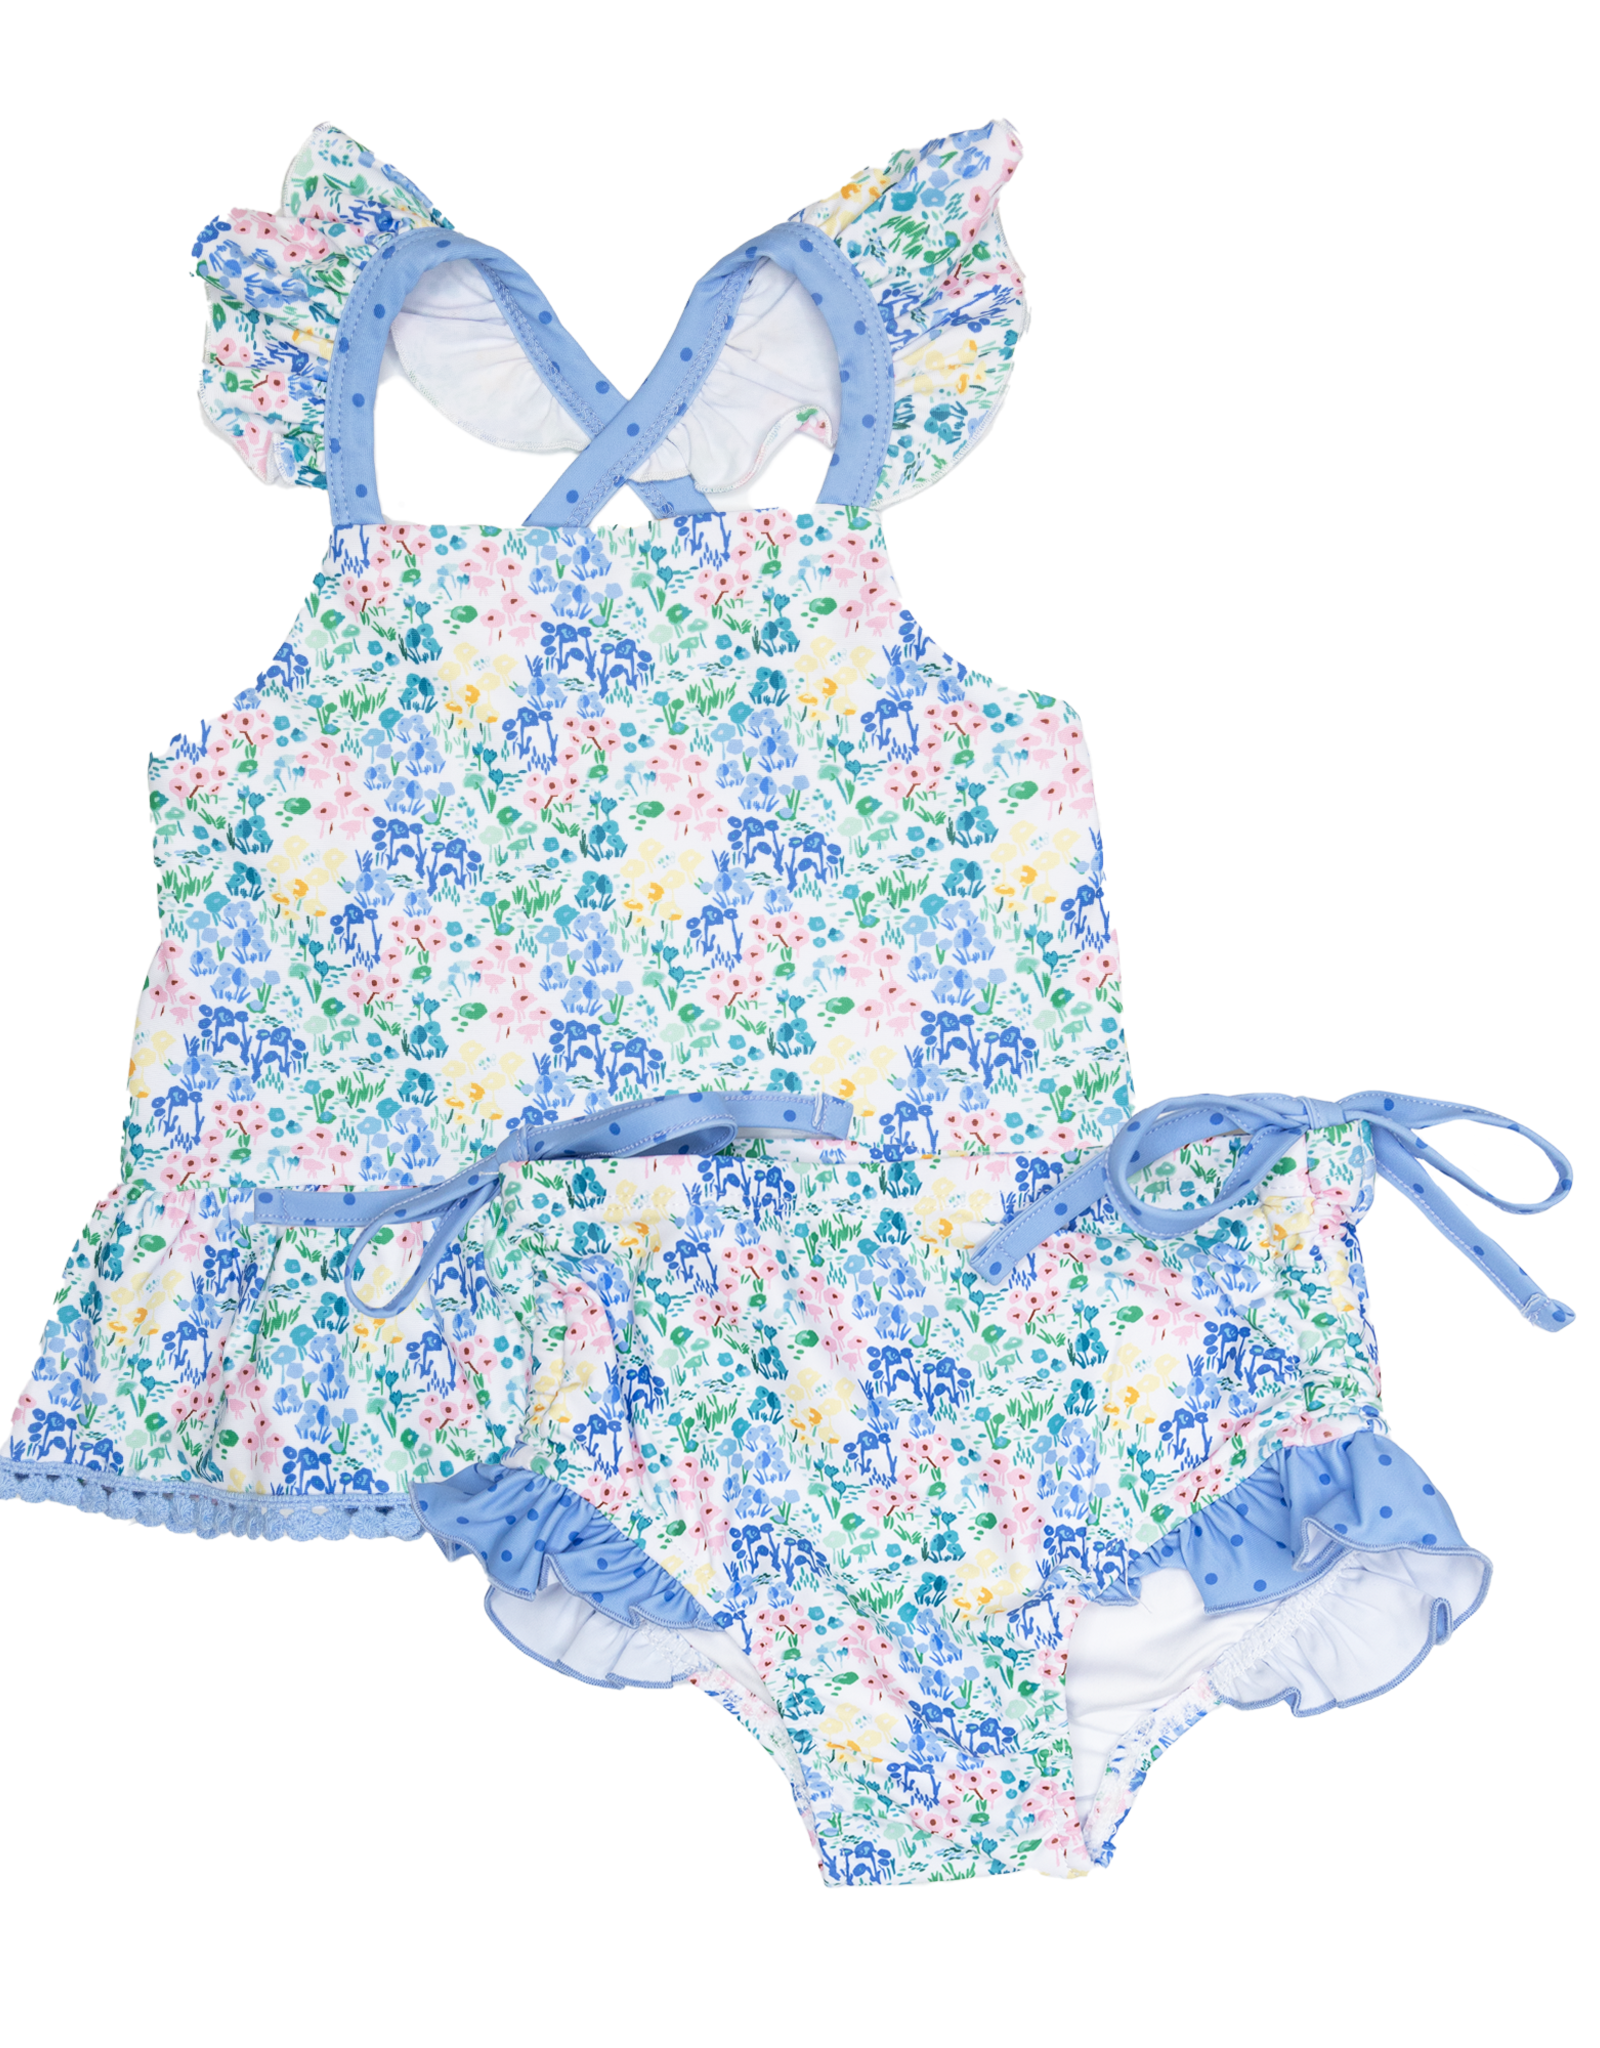 Swoon Baby 2414 Tunic Blue Floral 2 pc Swimsuit